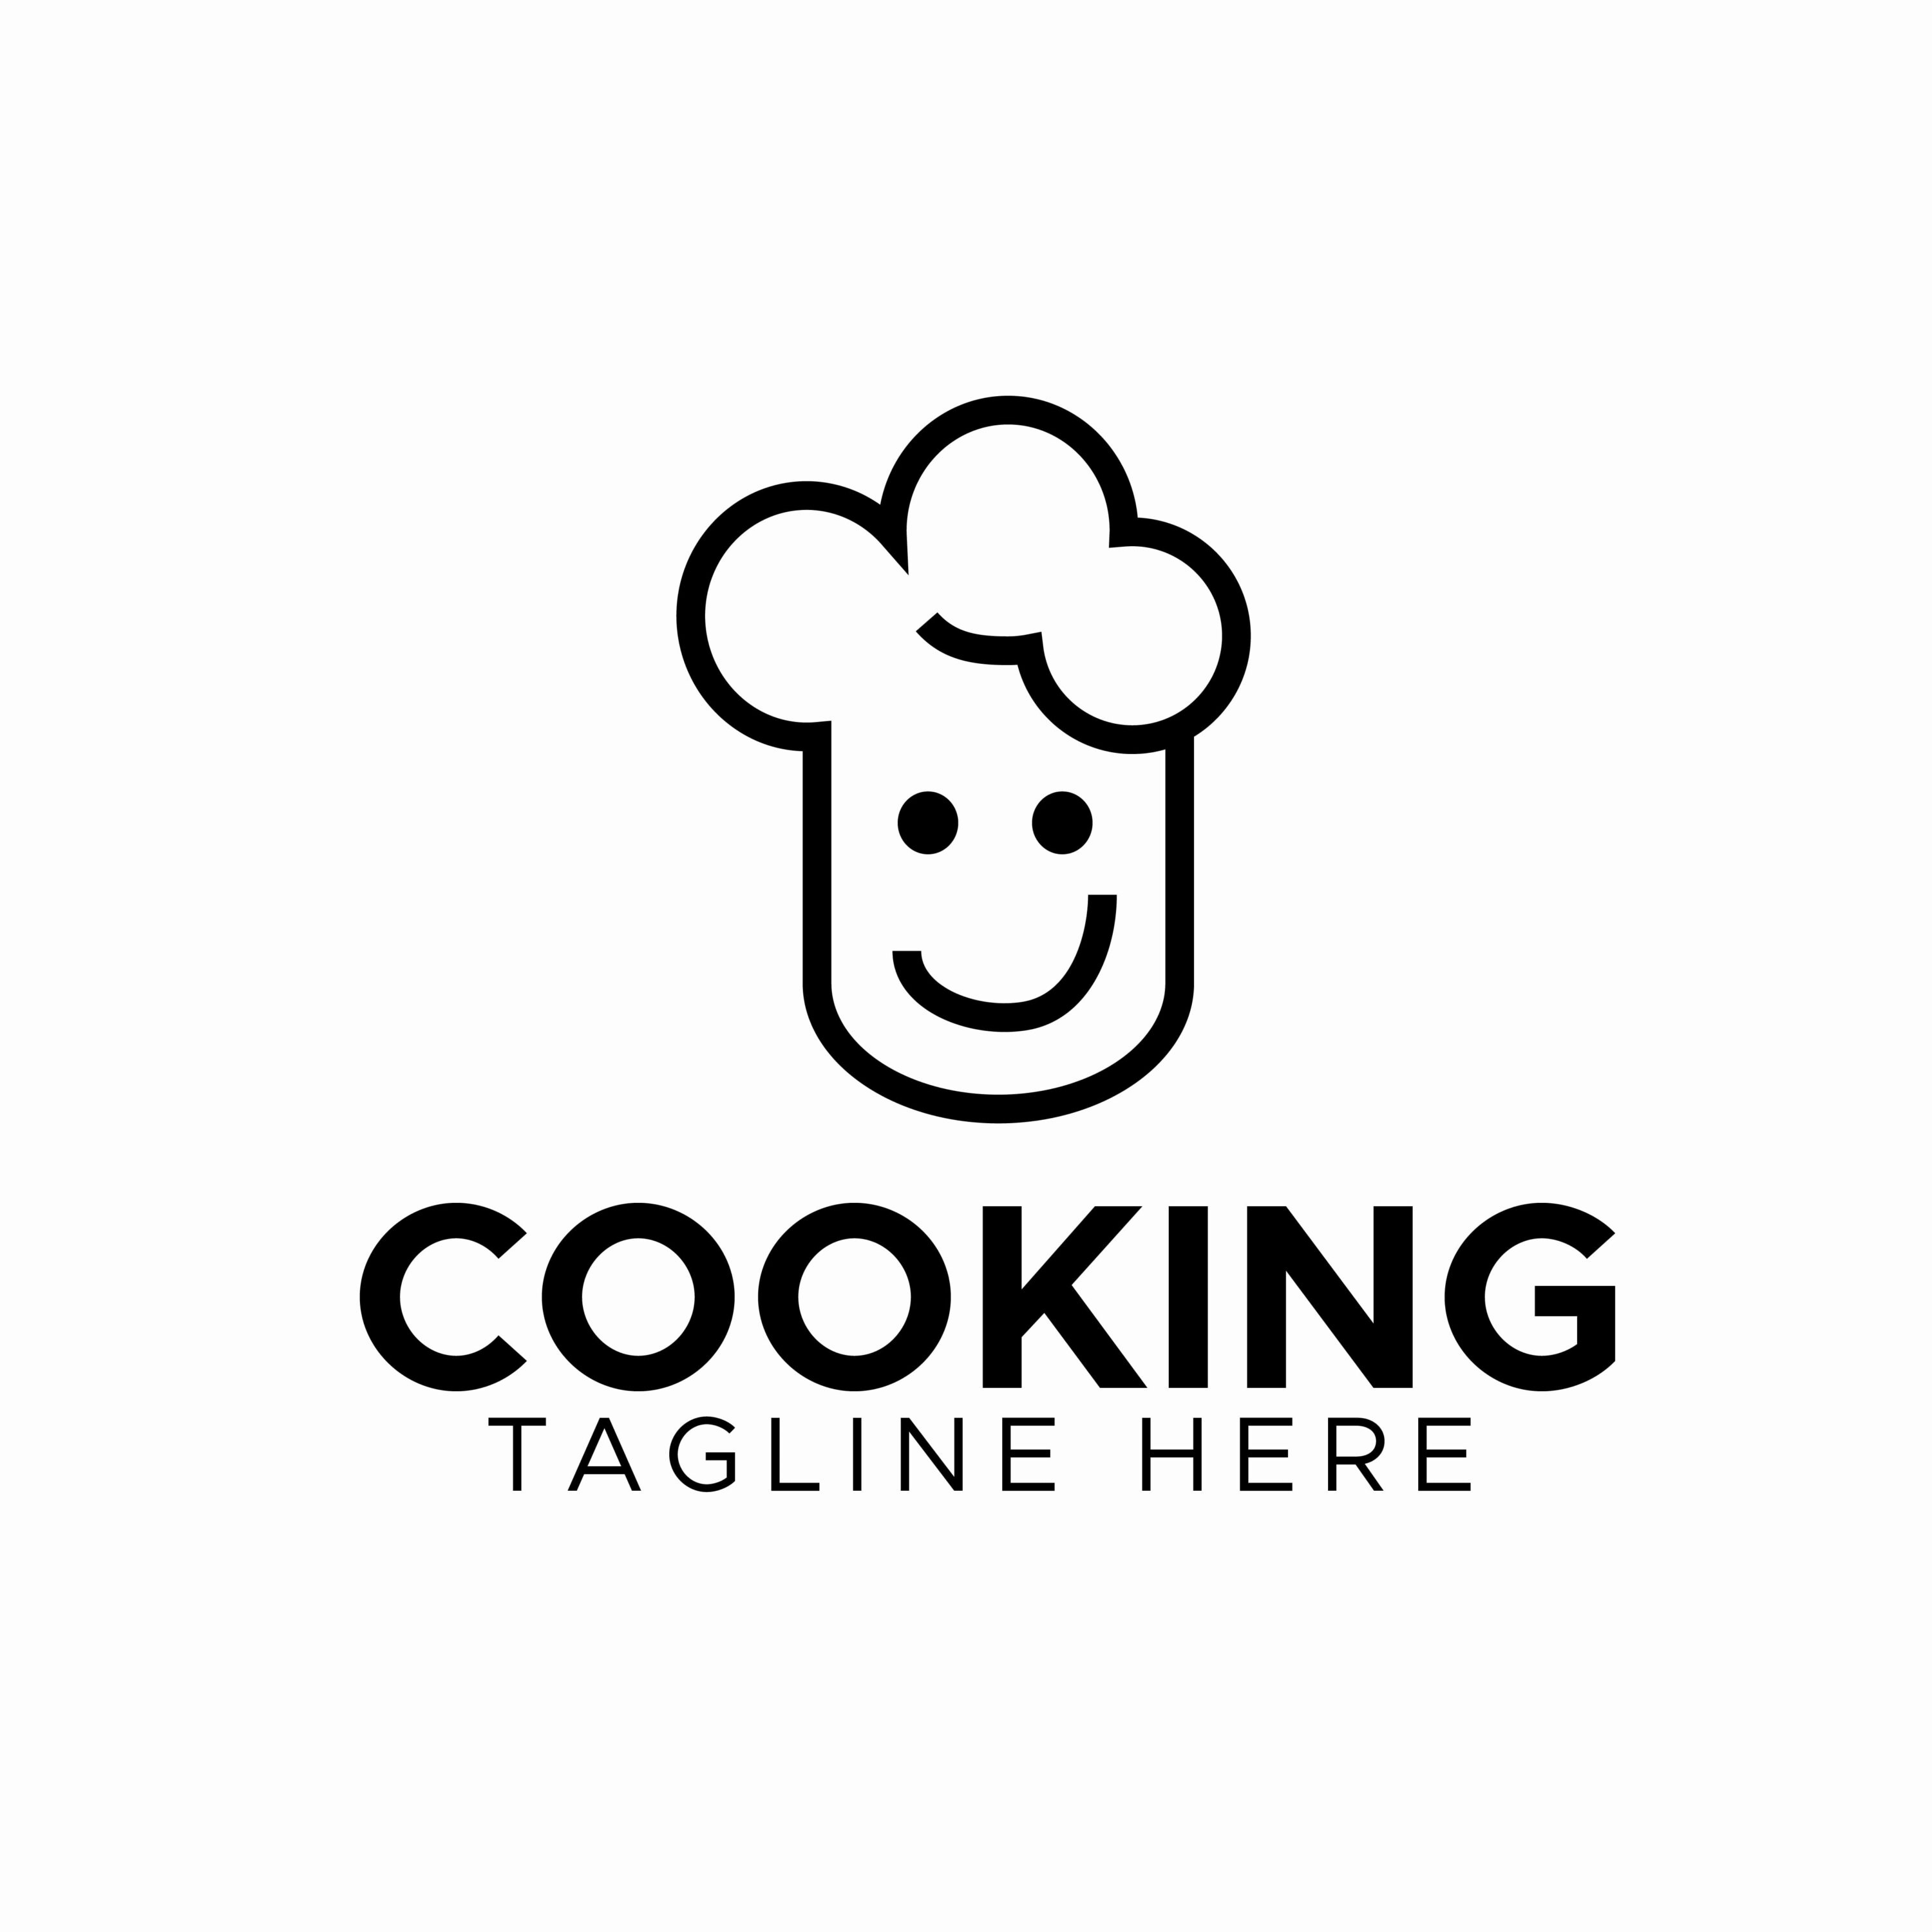 Chief - Cooking Logo main cover.